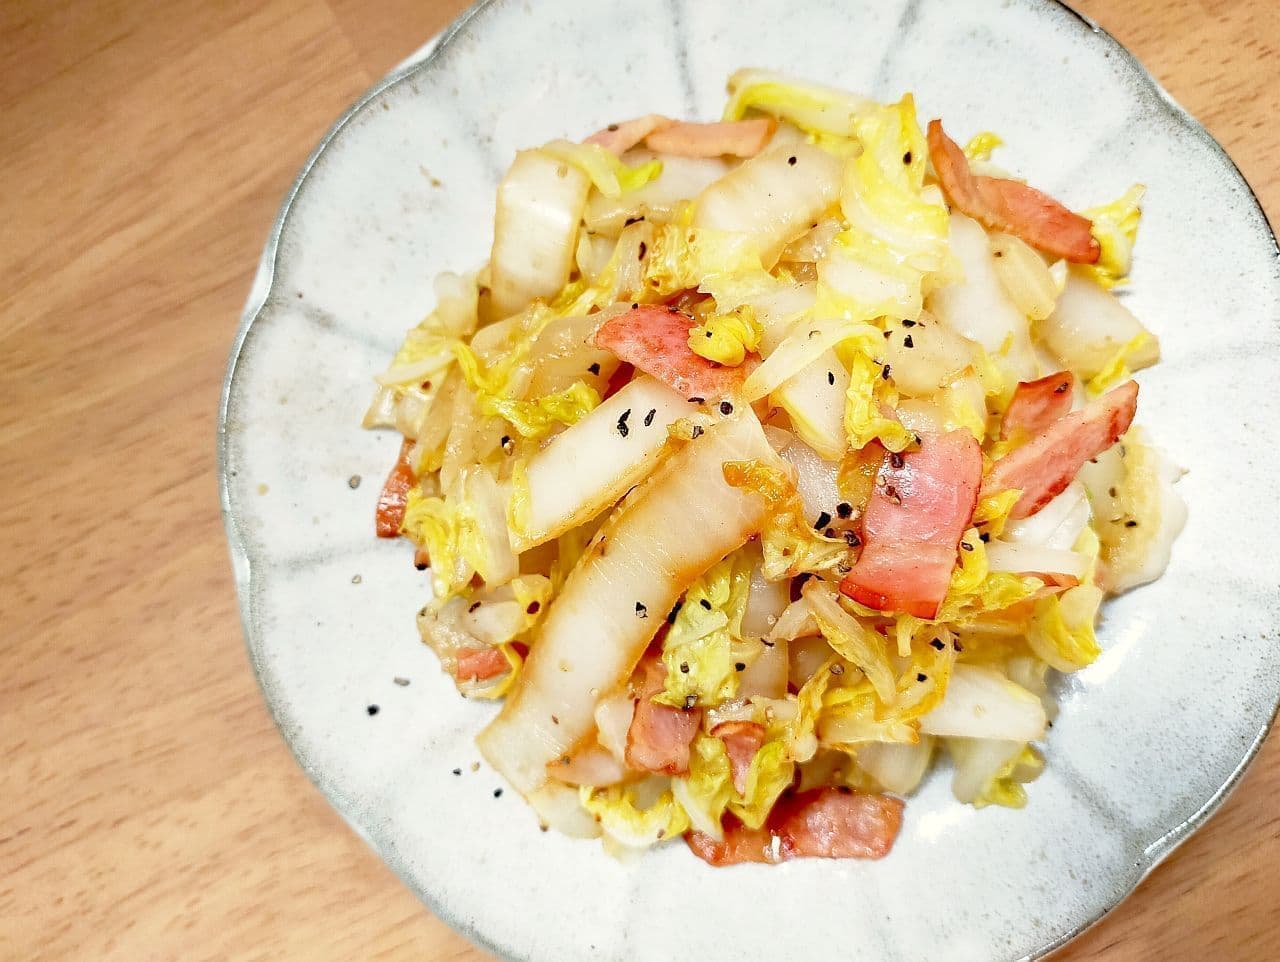 Recipe for "Fried Chinese Cabbage and Bacon with Butter